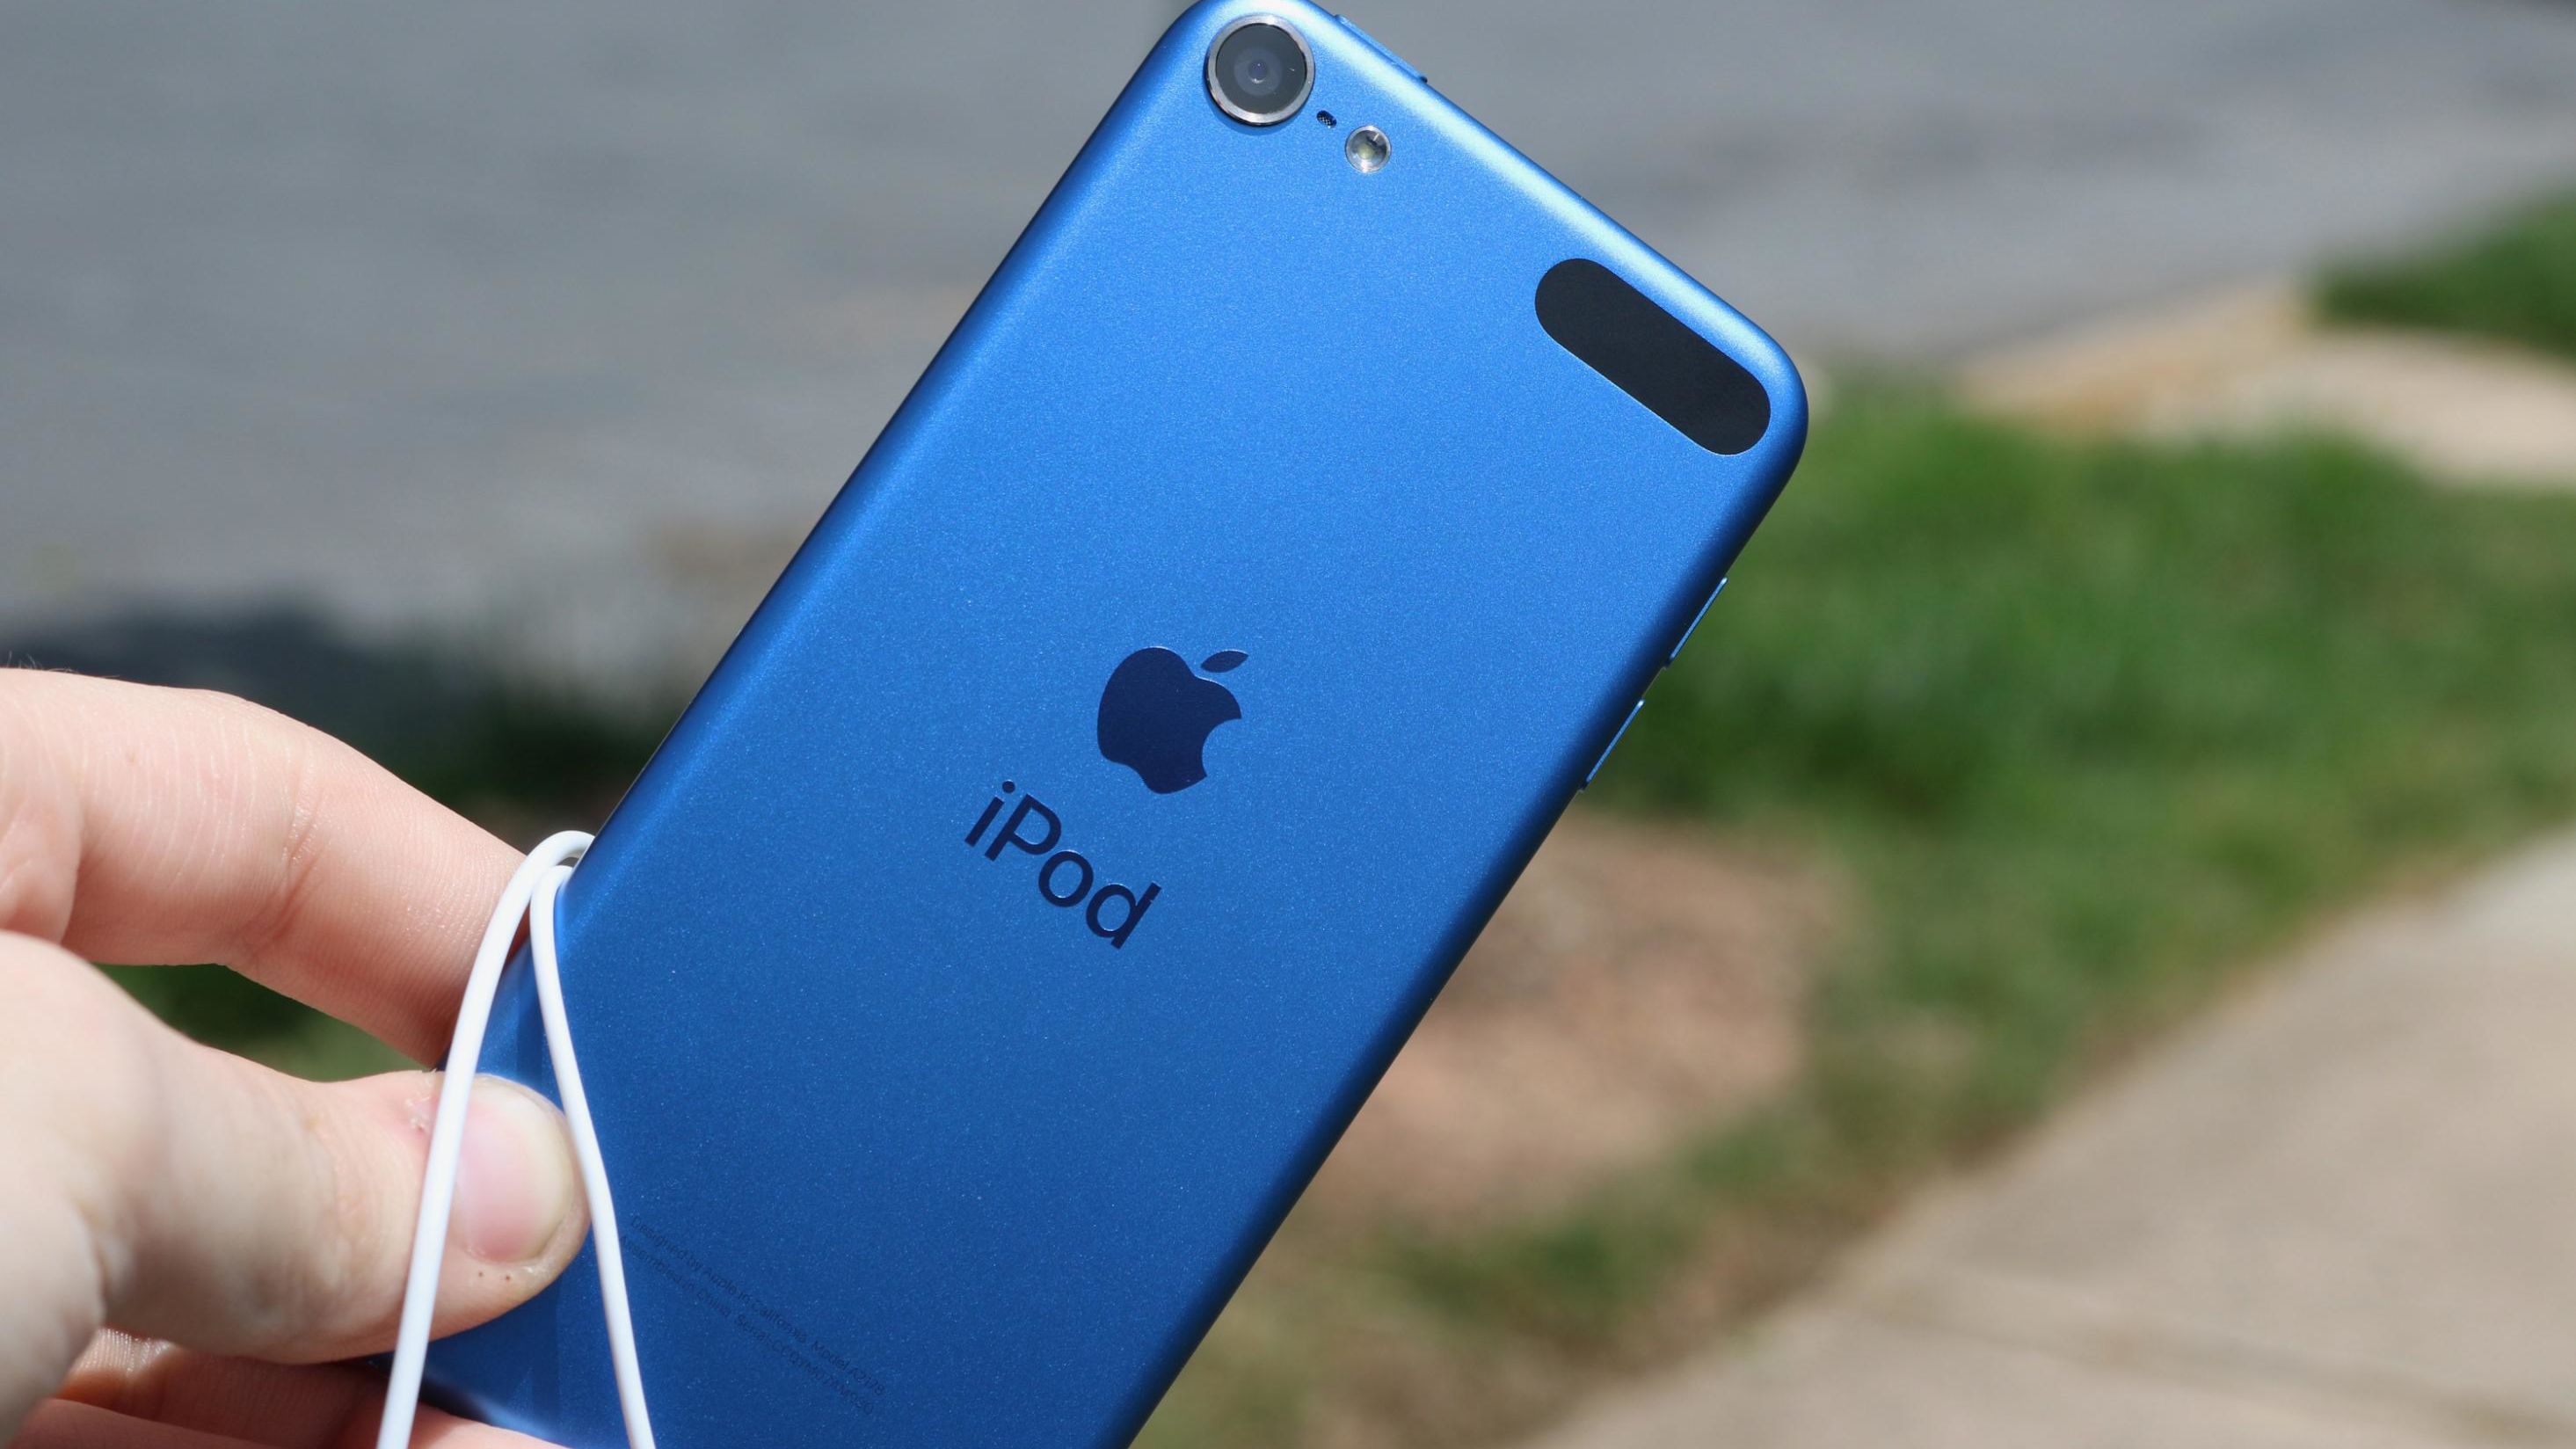 Apple iPod touch 7th Generation review: an affordable entry point to iOS